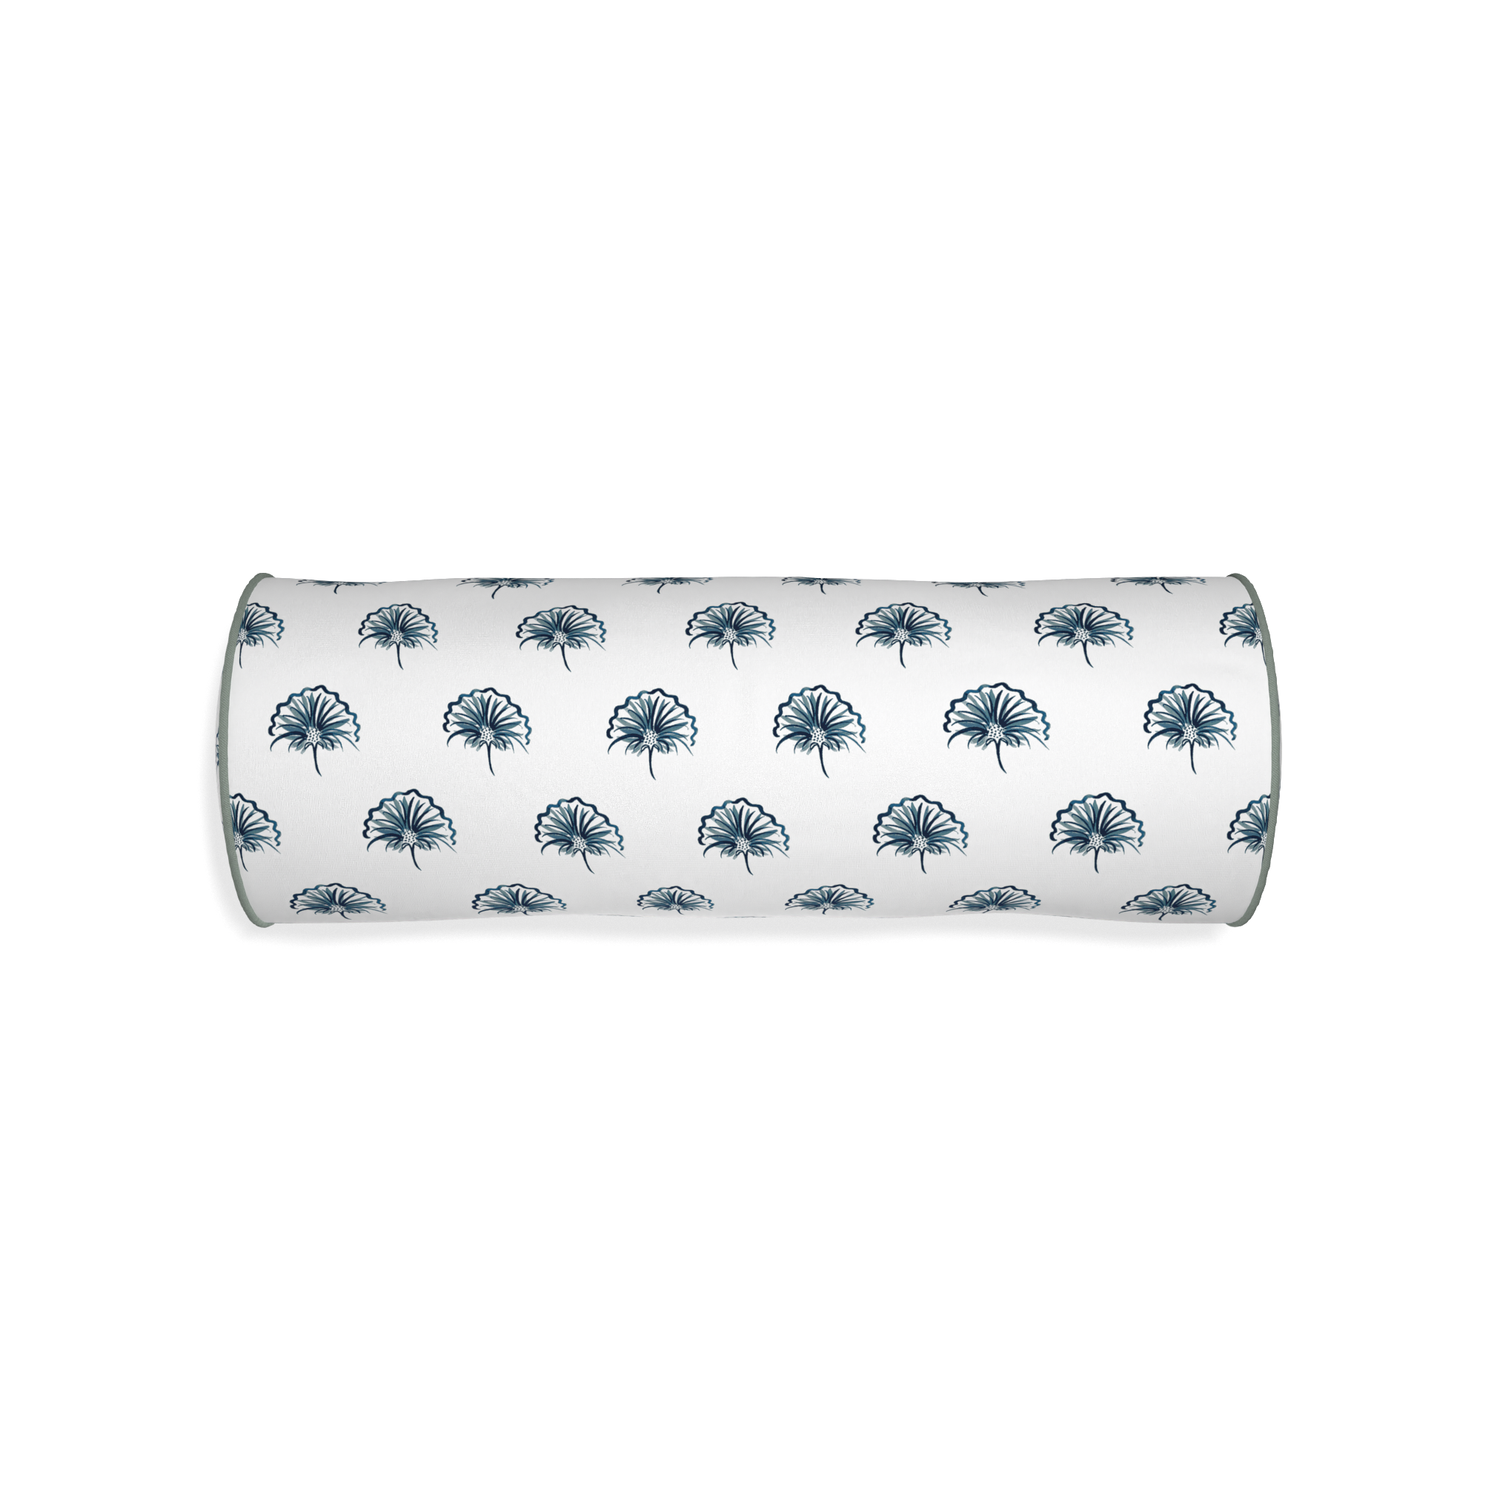 Bolster penelope midnight custom floral navypillow with sage piping on white background